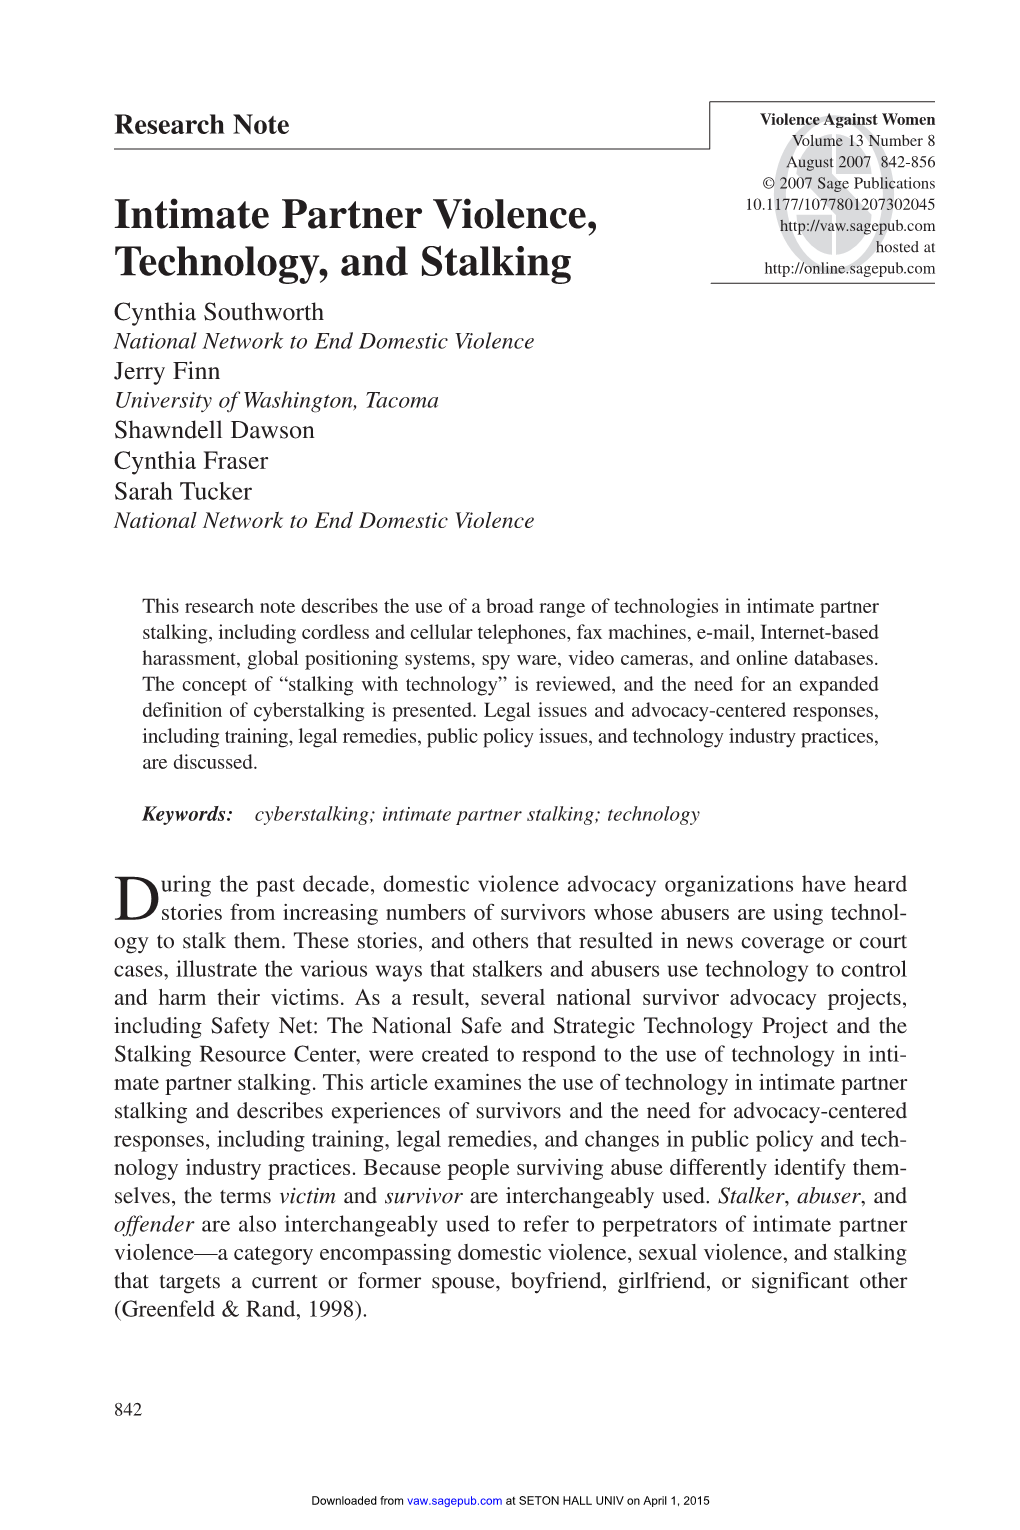 Intimate Partner Violence, Technology, and Stalking